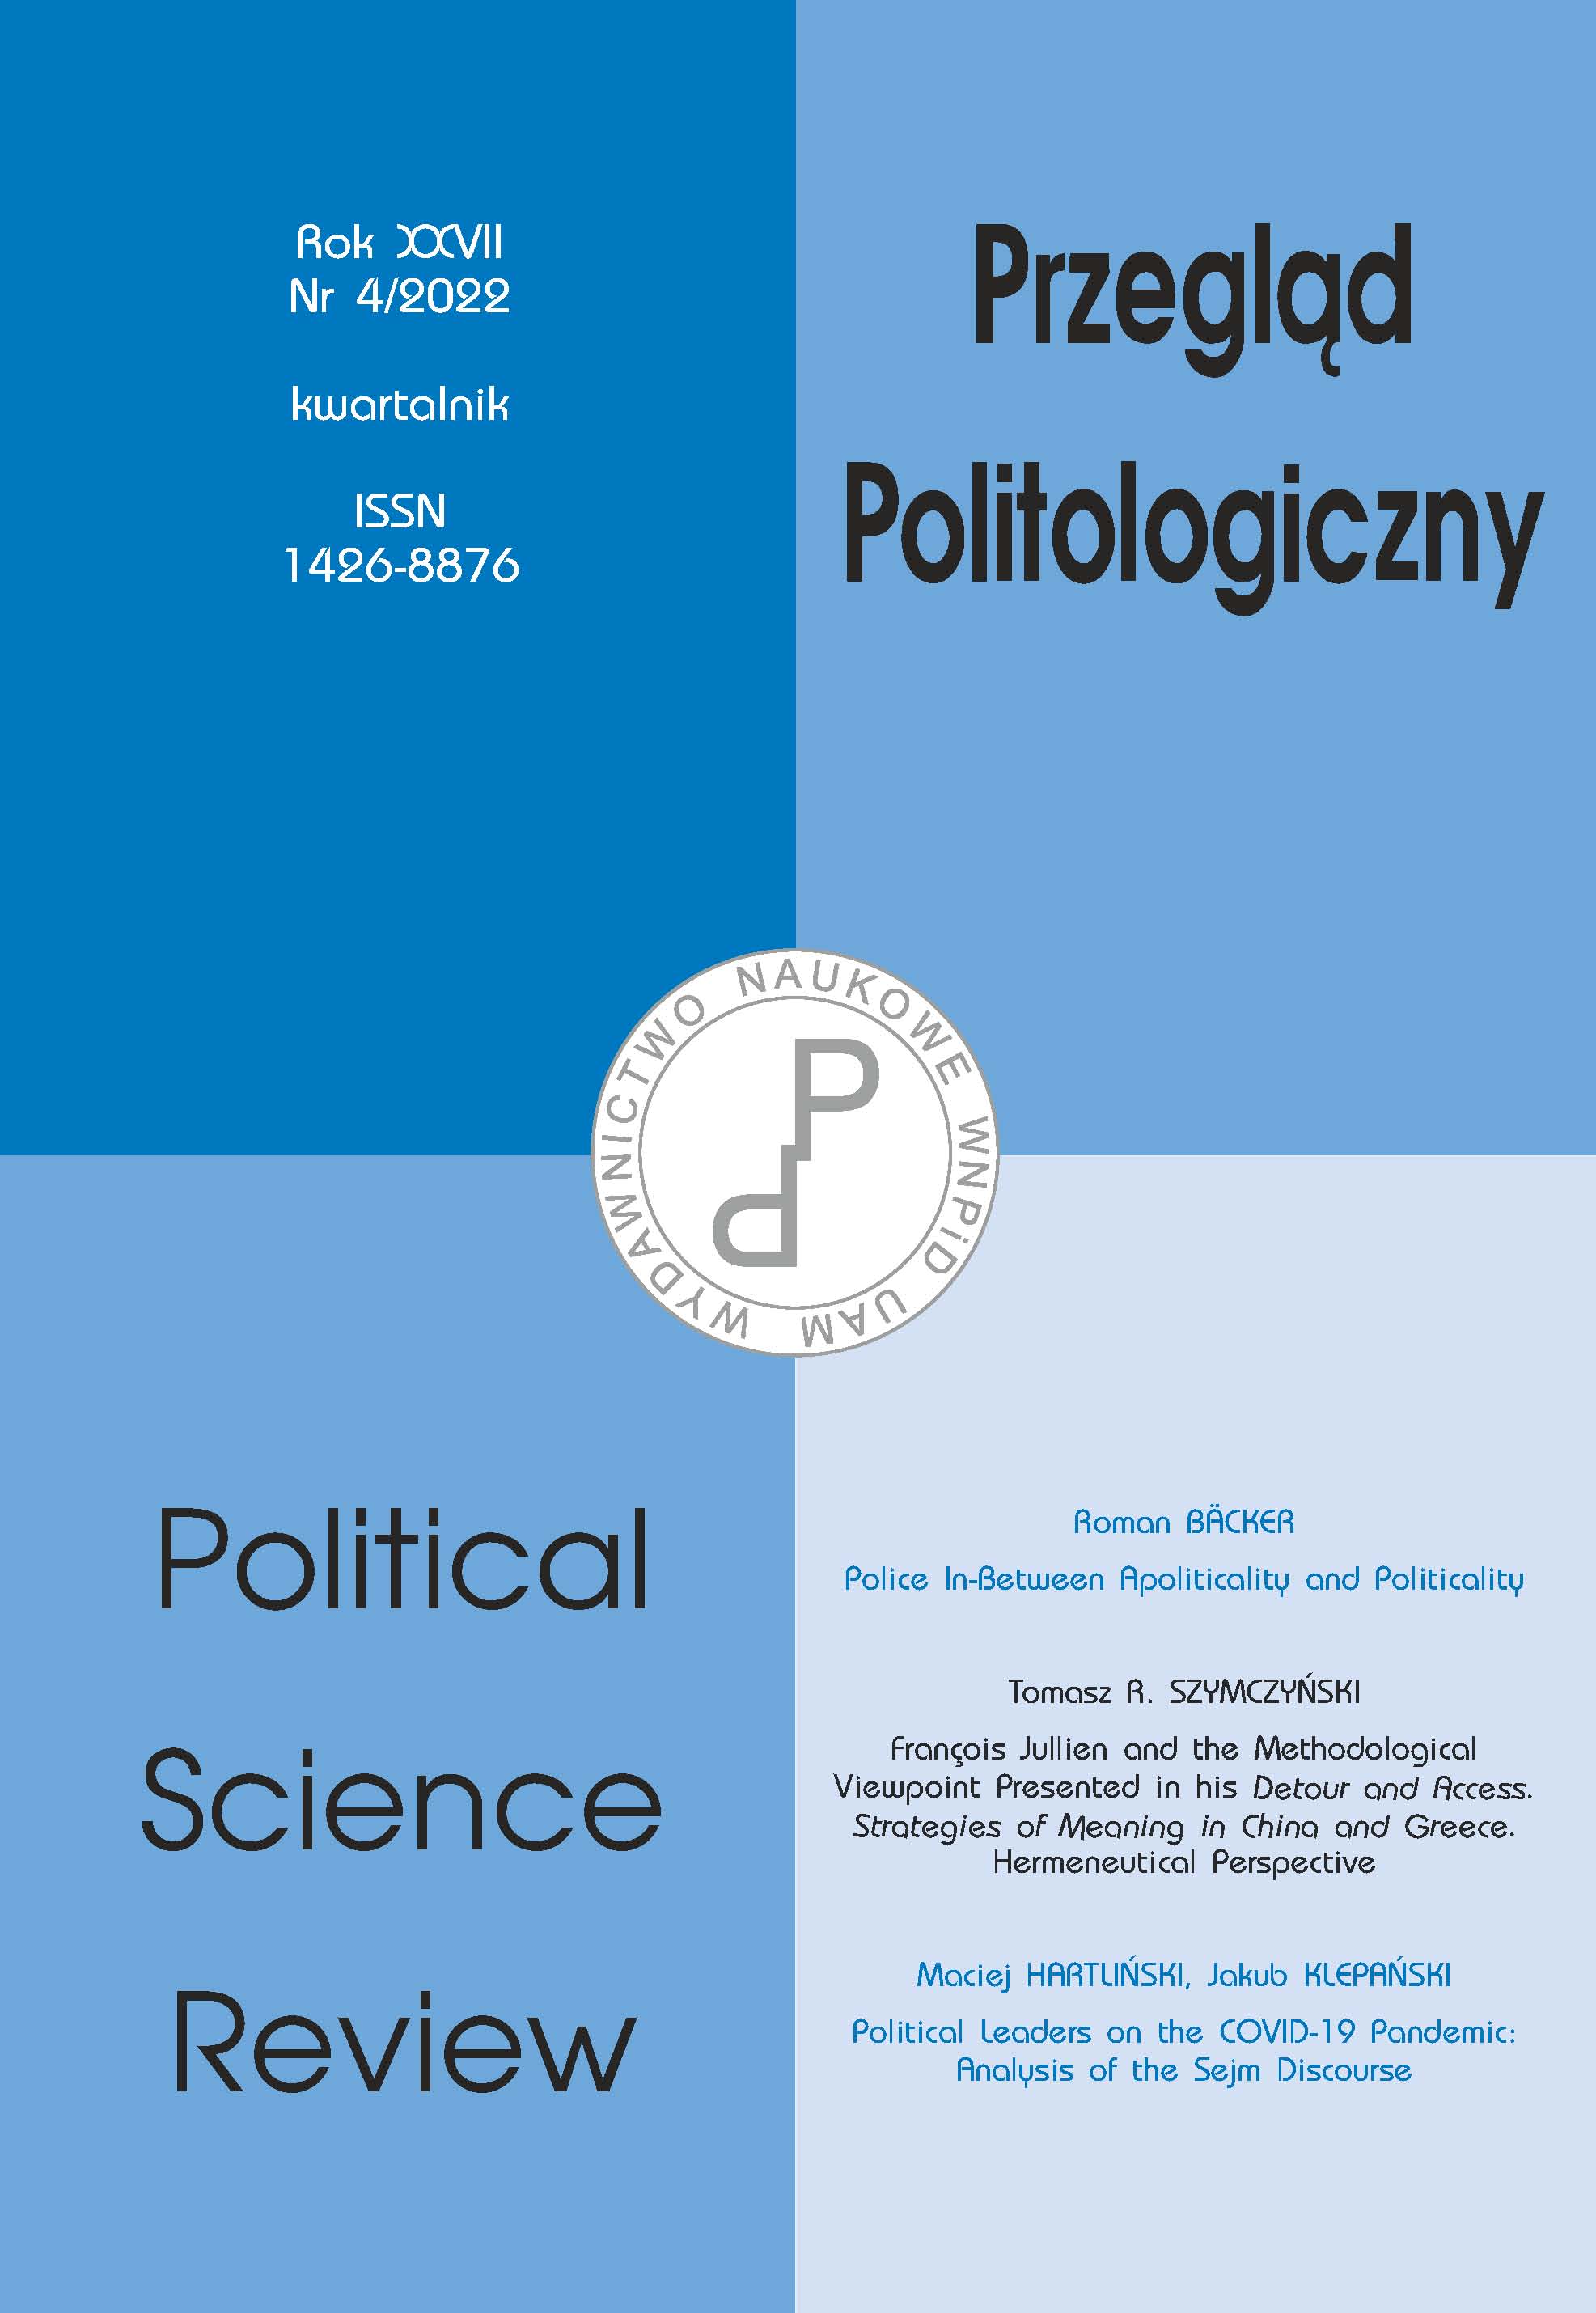 Postal Voting In the 2020 Presidential Election – How Did Electoral Participation Evolved During the COVID-19 Pandemic?